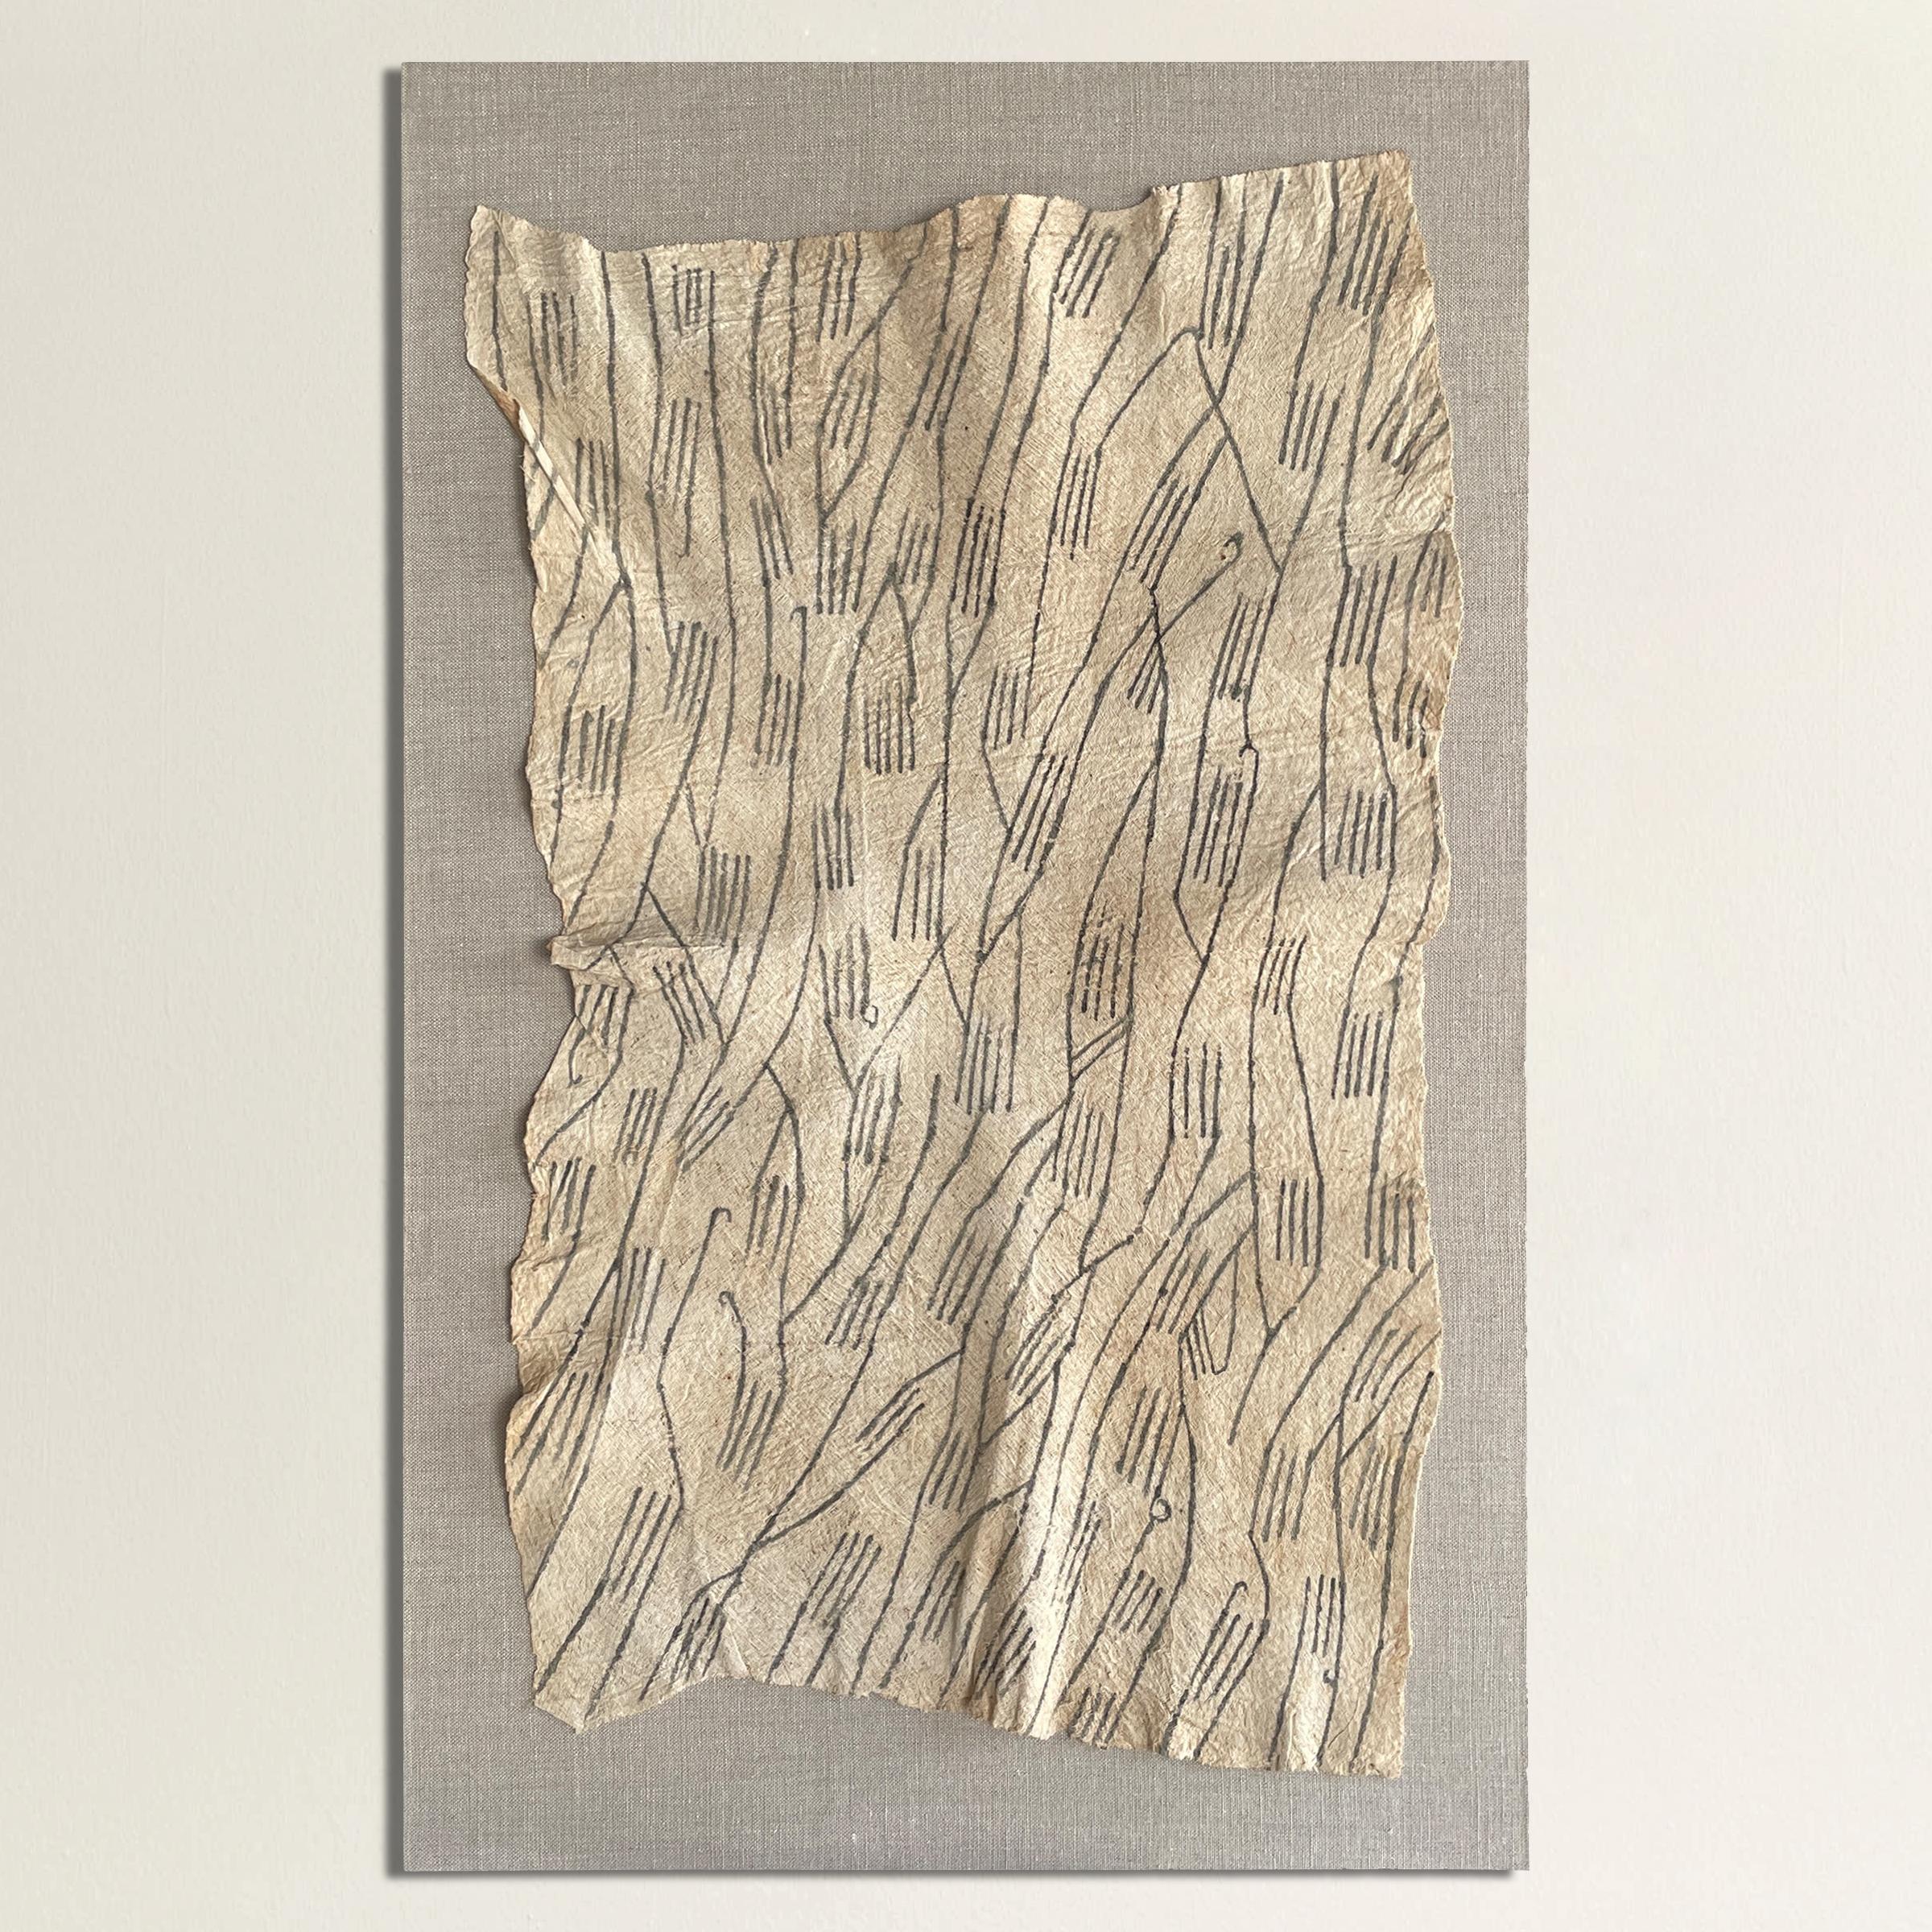 A striking and modern-in-spirit 20th century Mbuti Pygmy barkcloth textiles, mounted on a linen presentation board. The textile is made from ficus bark pounded to a thin cloth-like material and painted with myriad biomorphic shapes using natural